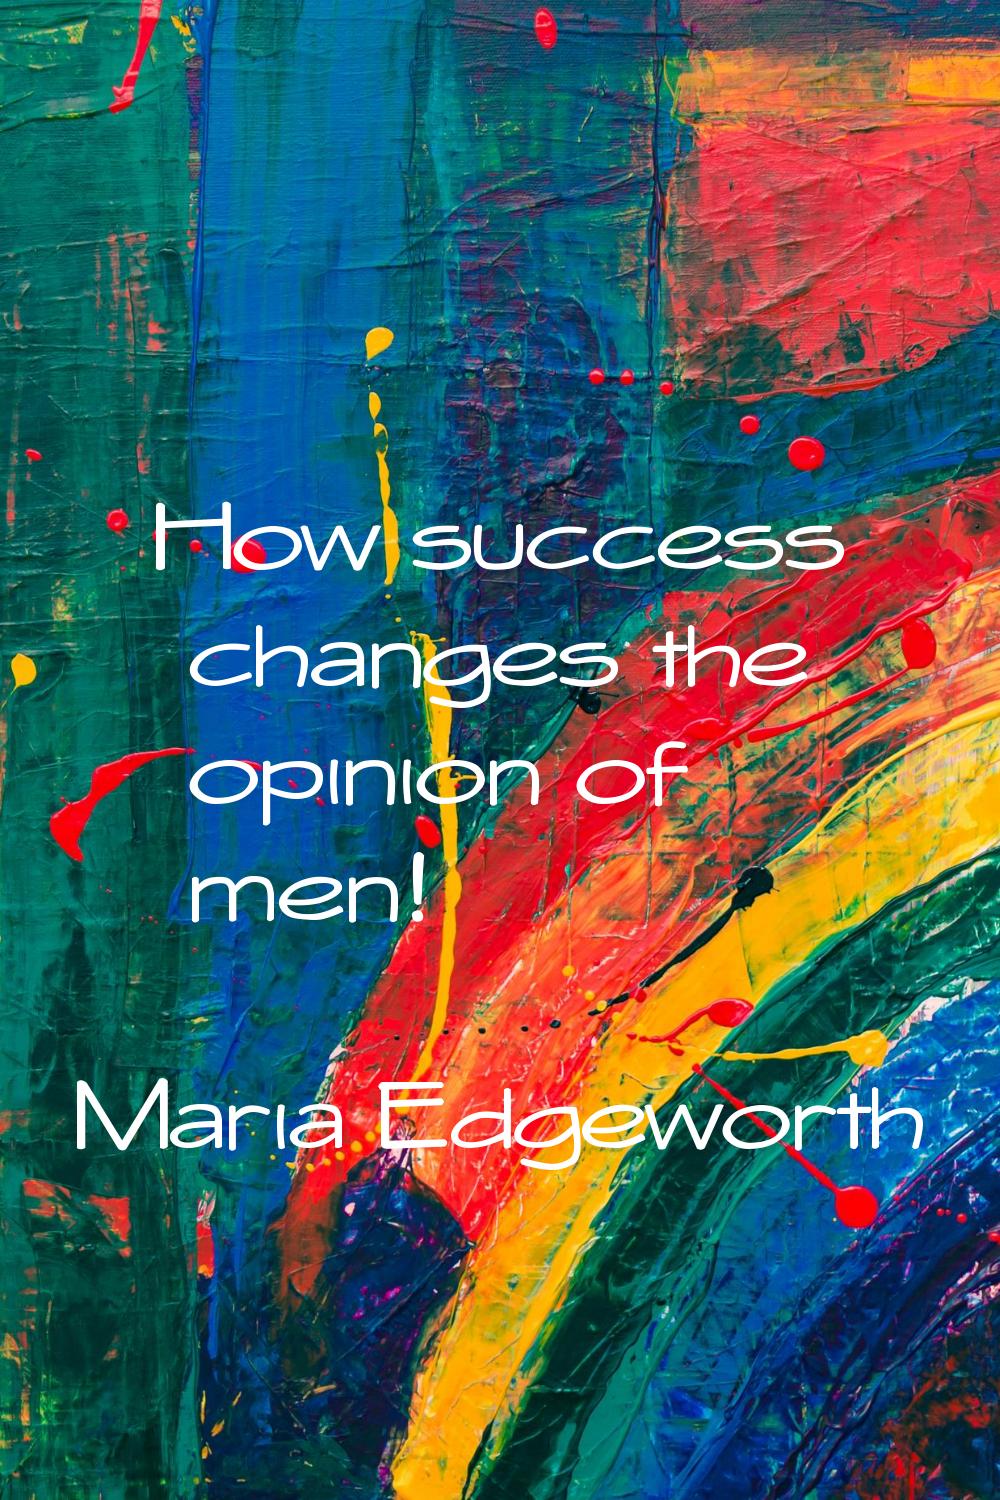 How success changes the opinion of men!